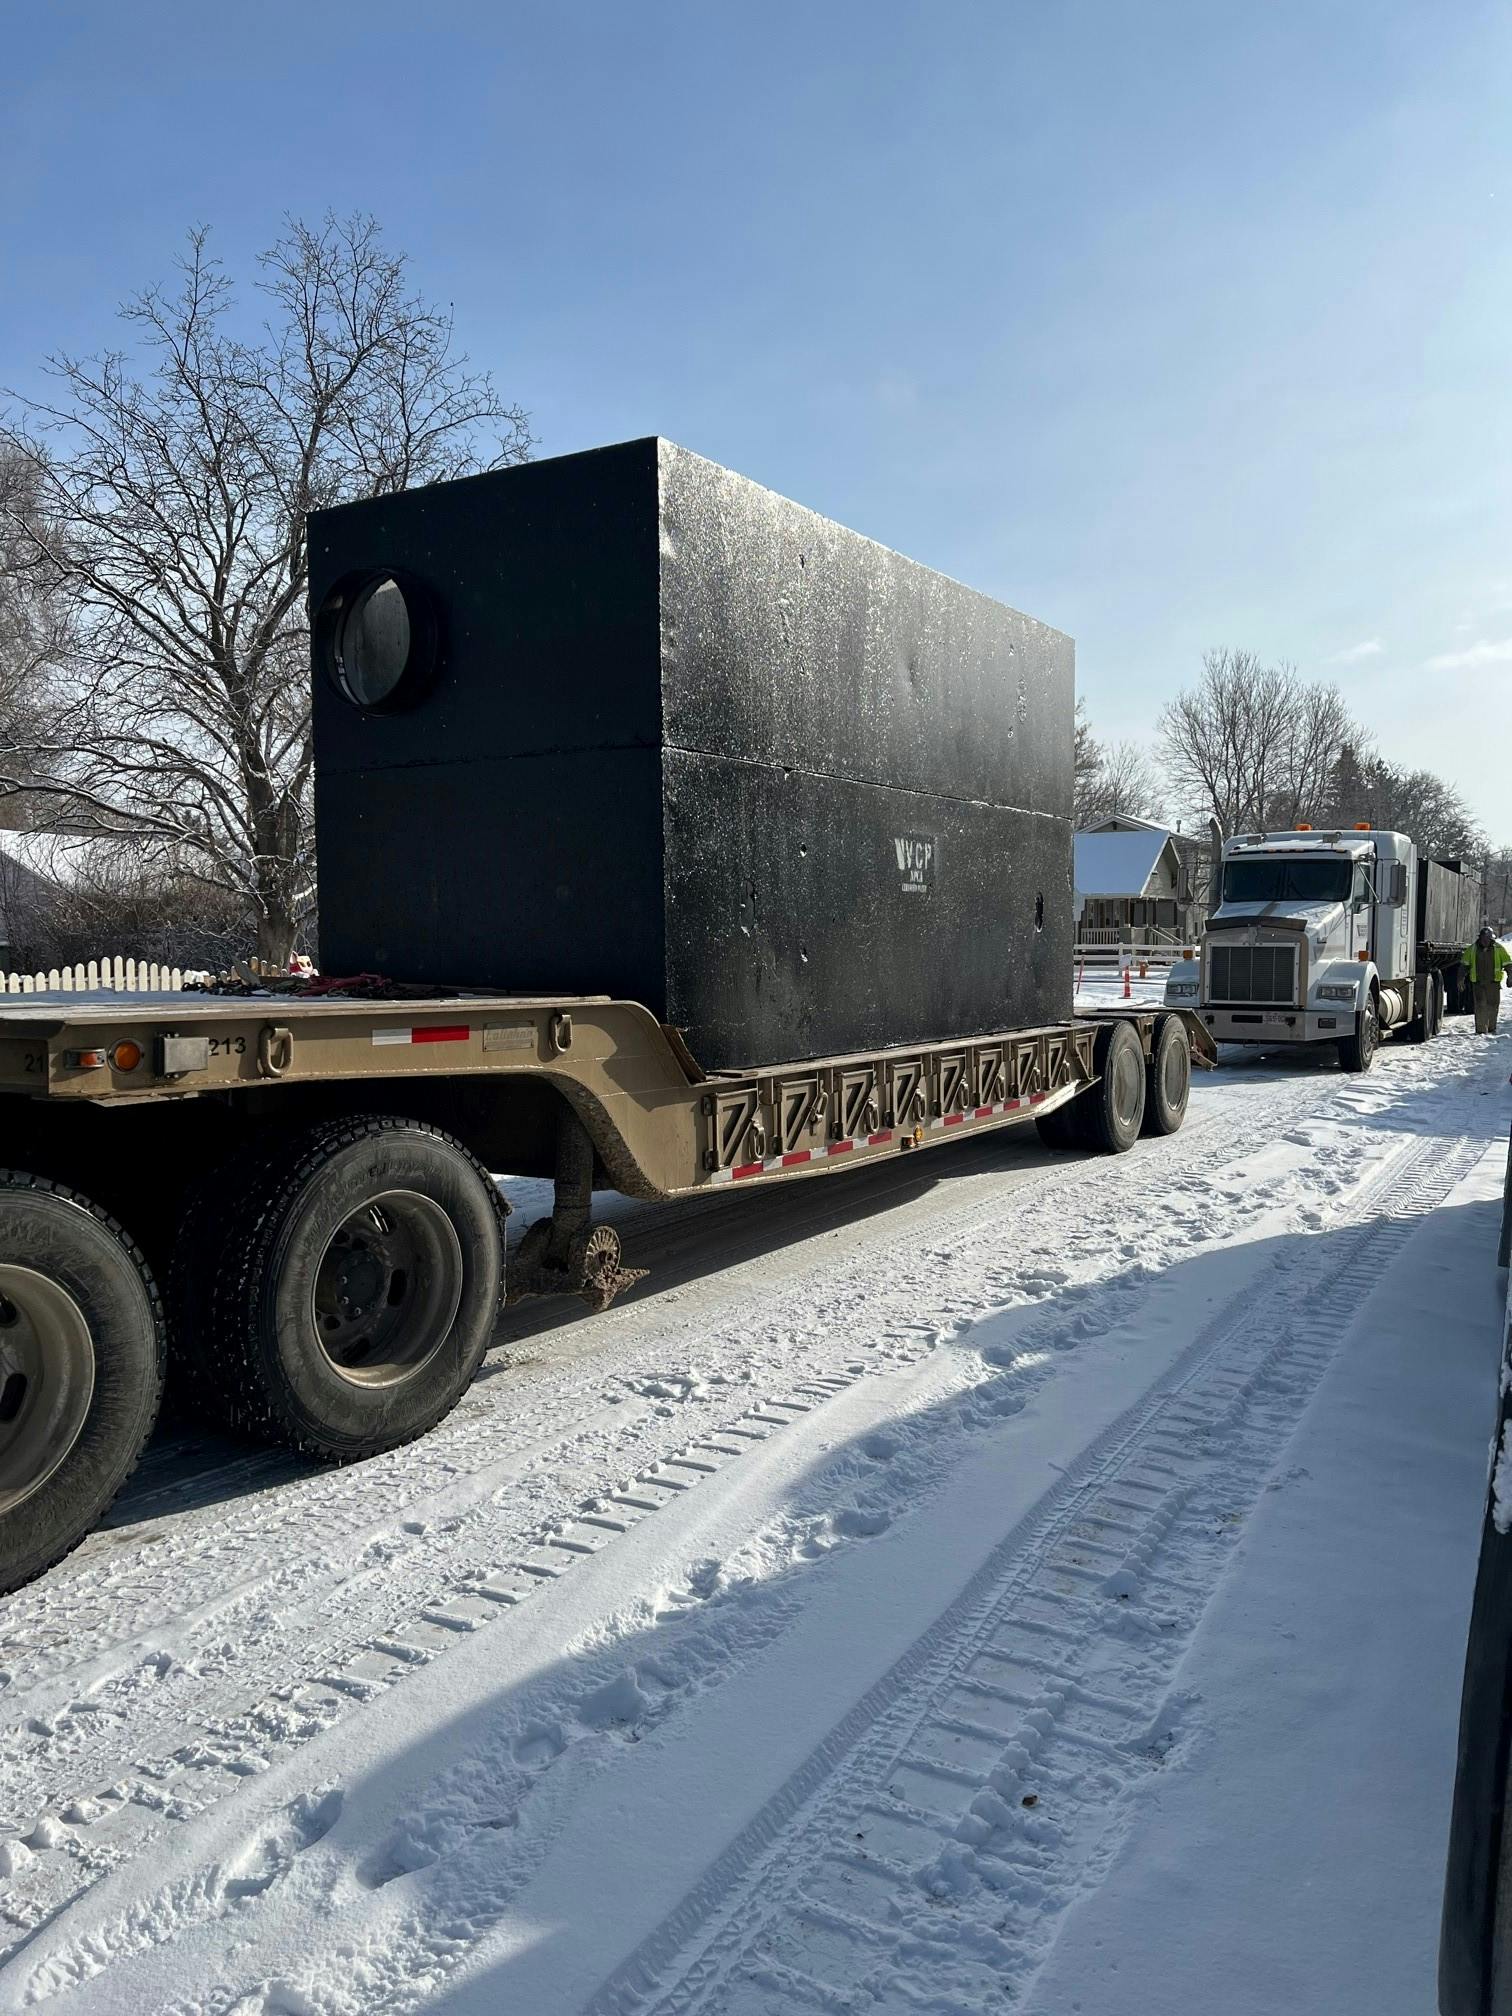 March 10, 2022 - The underground water quality structure was delivered by two trucks, combined, it weighs close to 47,000 pounds and is 17-ft x 7-ft.  The large size helps with storage of sediment removed by the device.